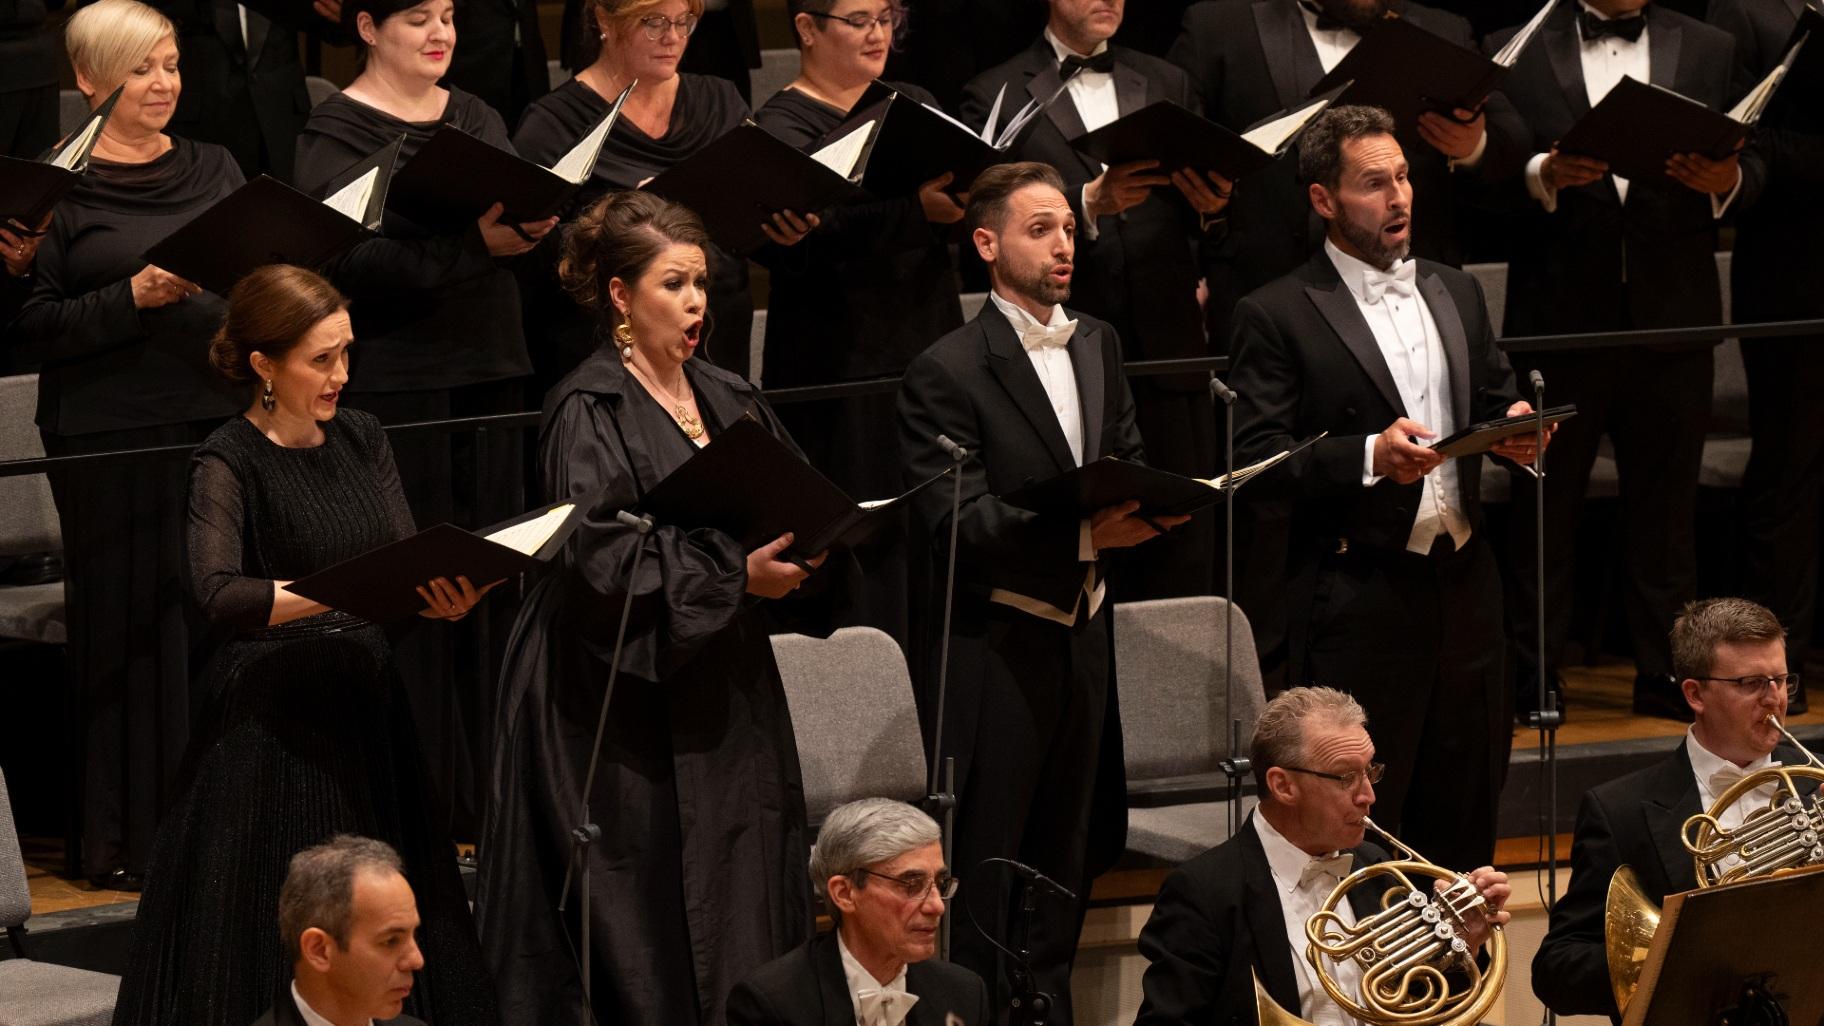 Soloists Erin Morley (soprano), Alisa Kolosova (mezzo-soprano), Giovanni Sala (tenor) and Kyle Ketelsen (bass-baritone) in a performance of Beethoven’s “Missa solemnis” with Riccardo Muti and the Chicago Symphony Orchestra and Chorus. (Todd Rosenberg)